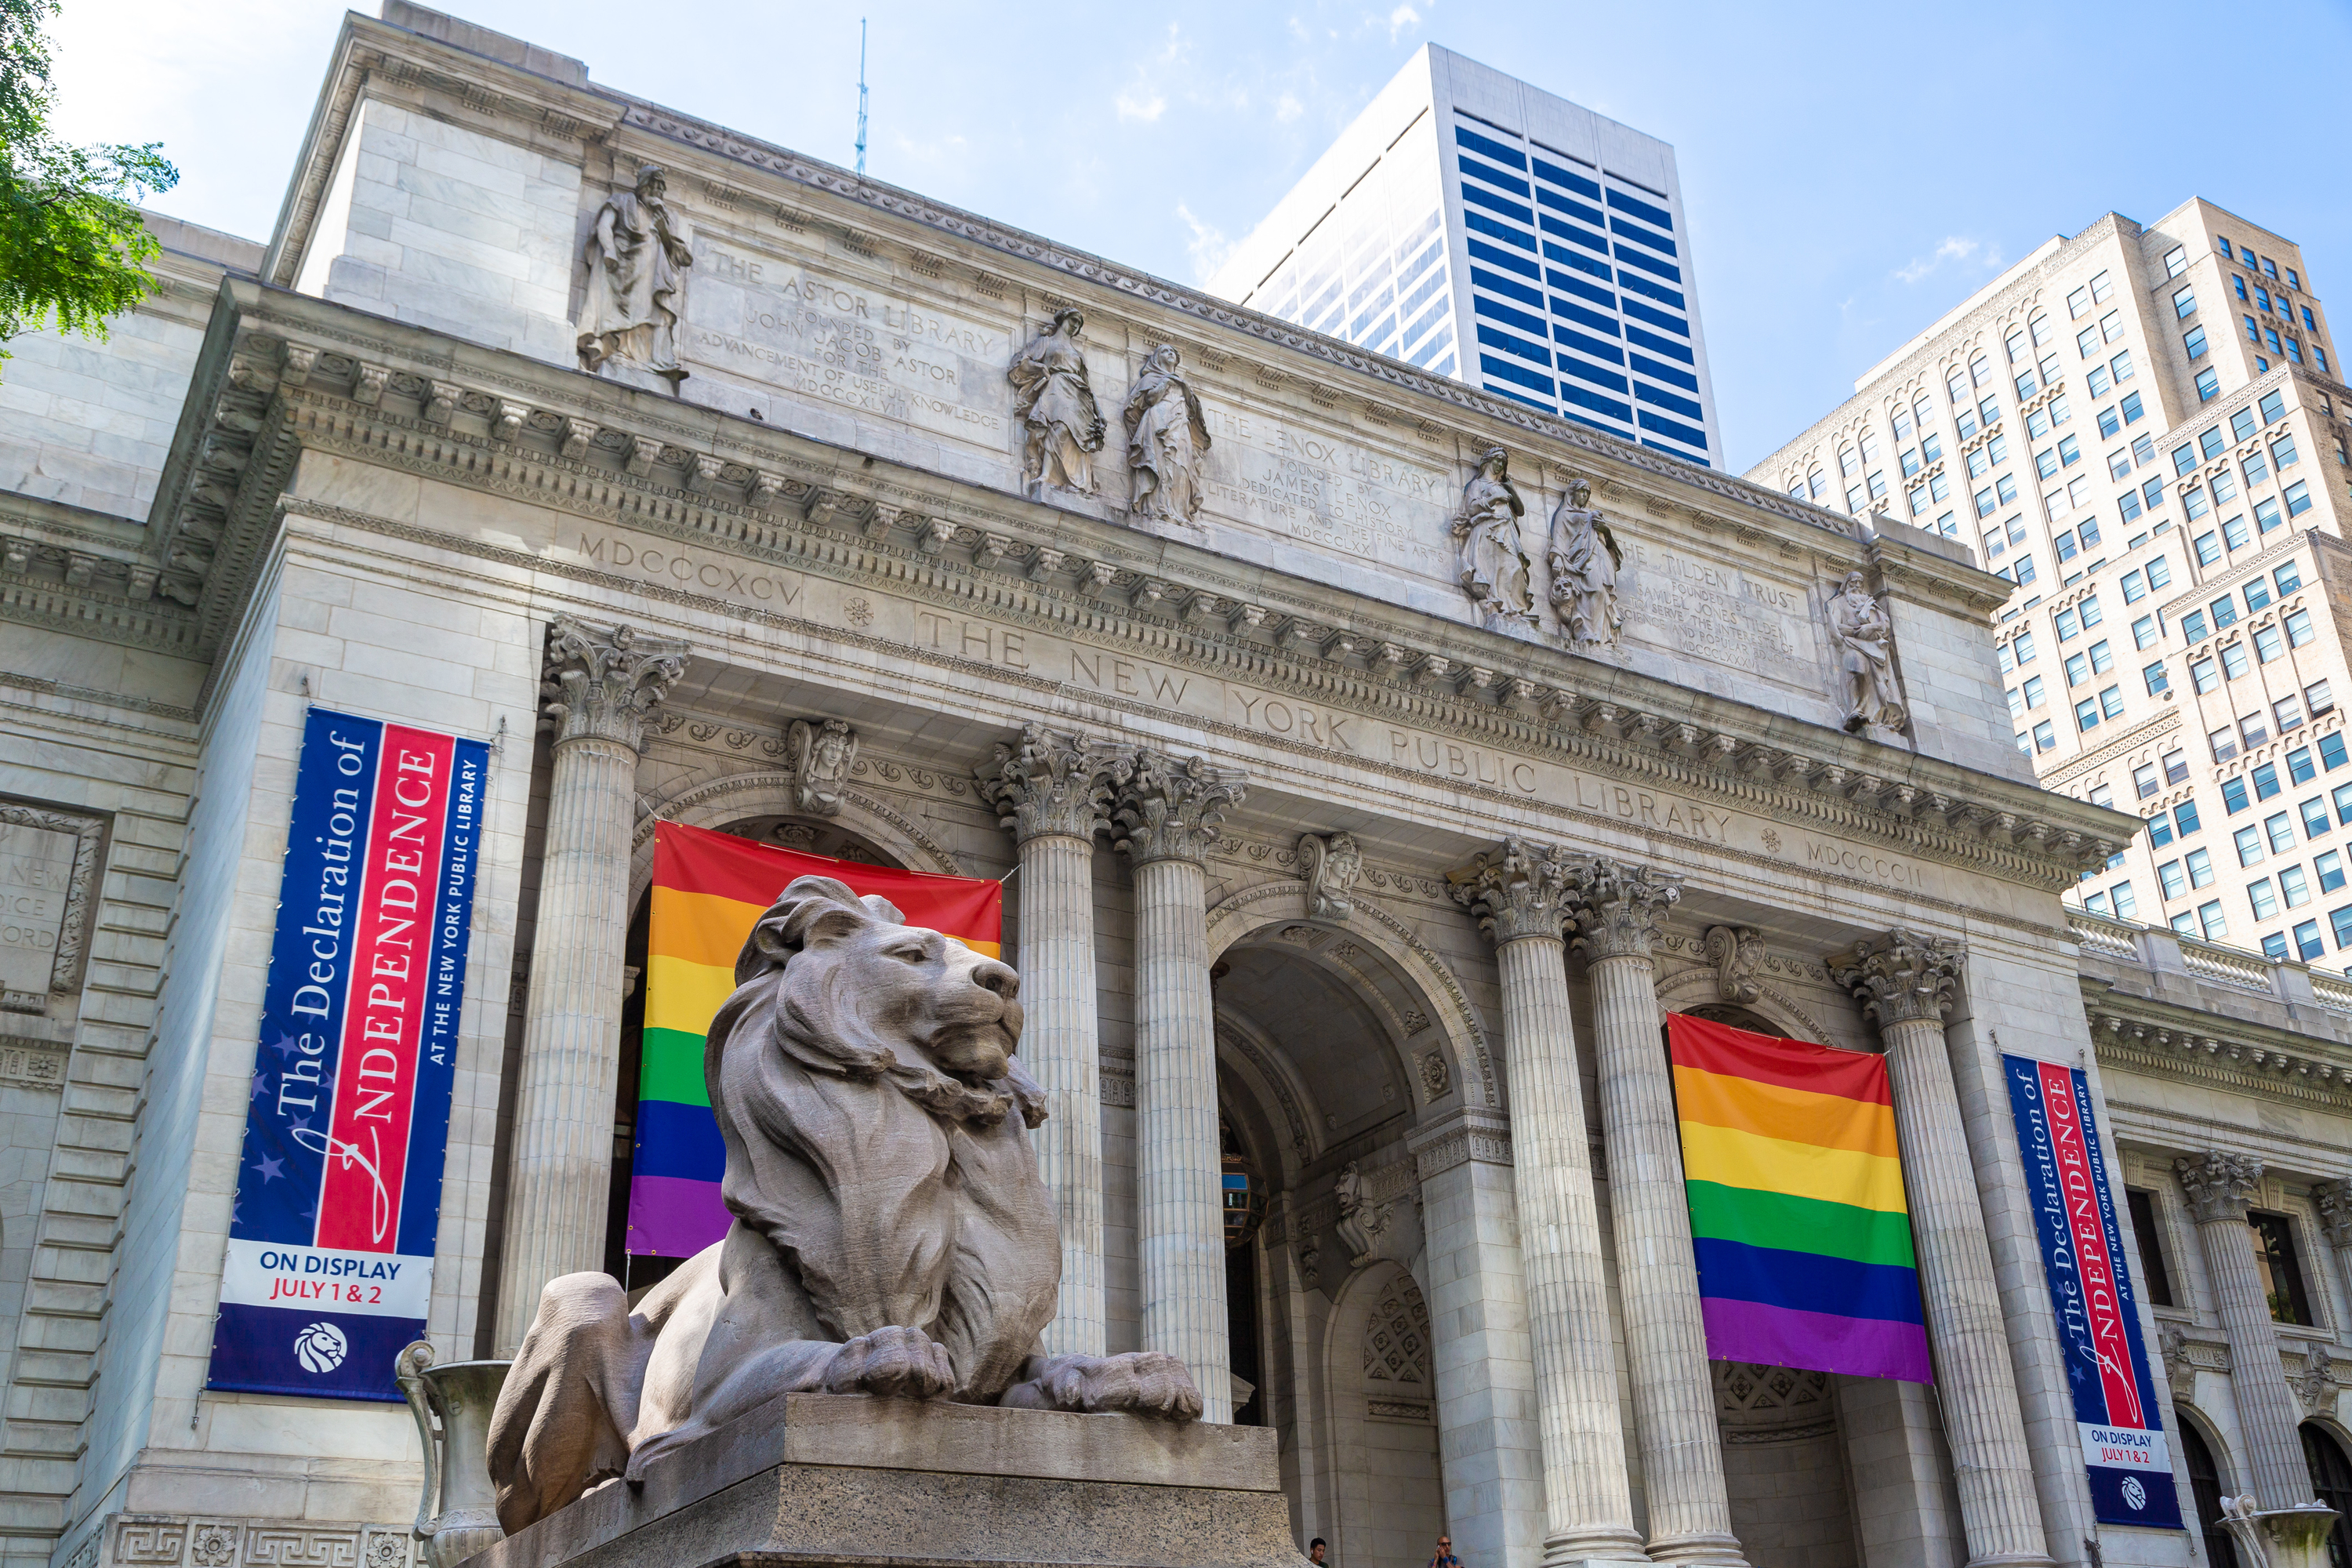 Kick off Pride Month at the New York Public Library after dark at this free event